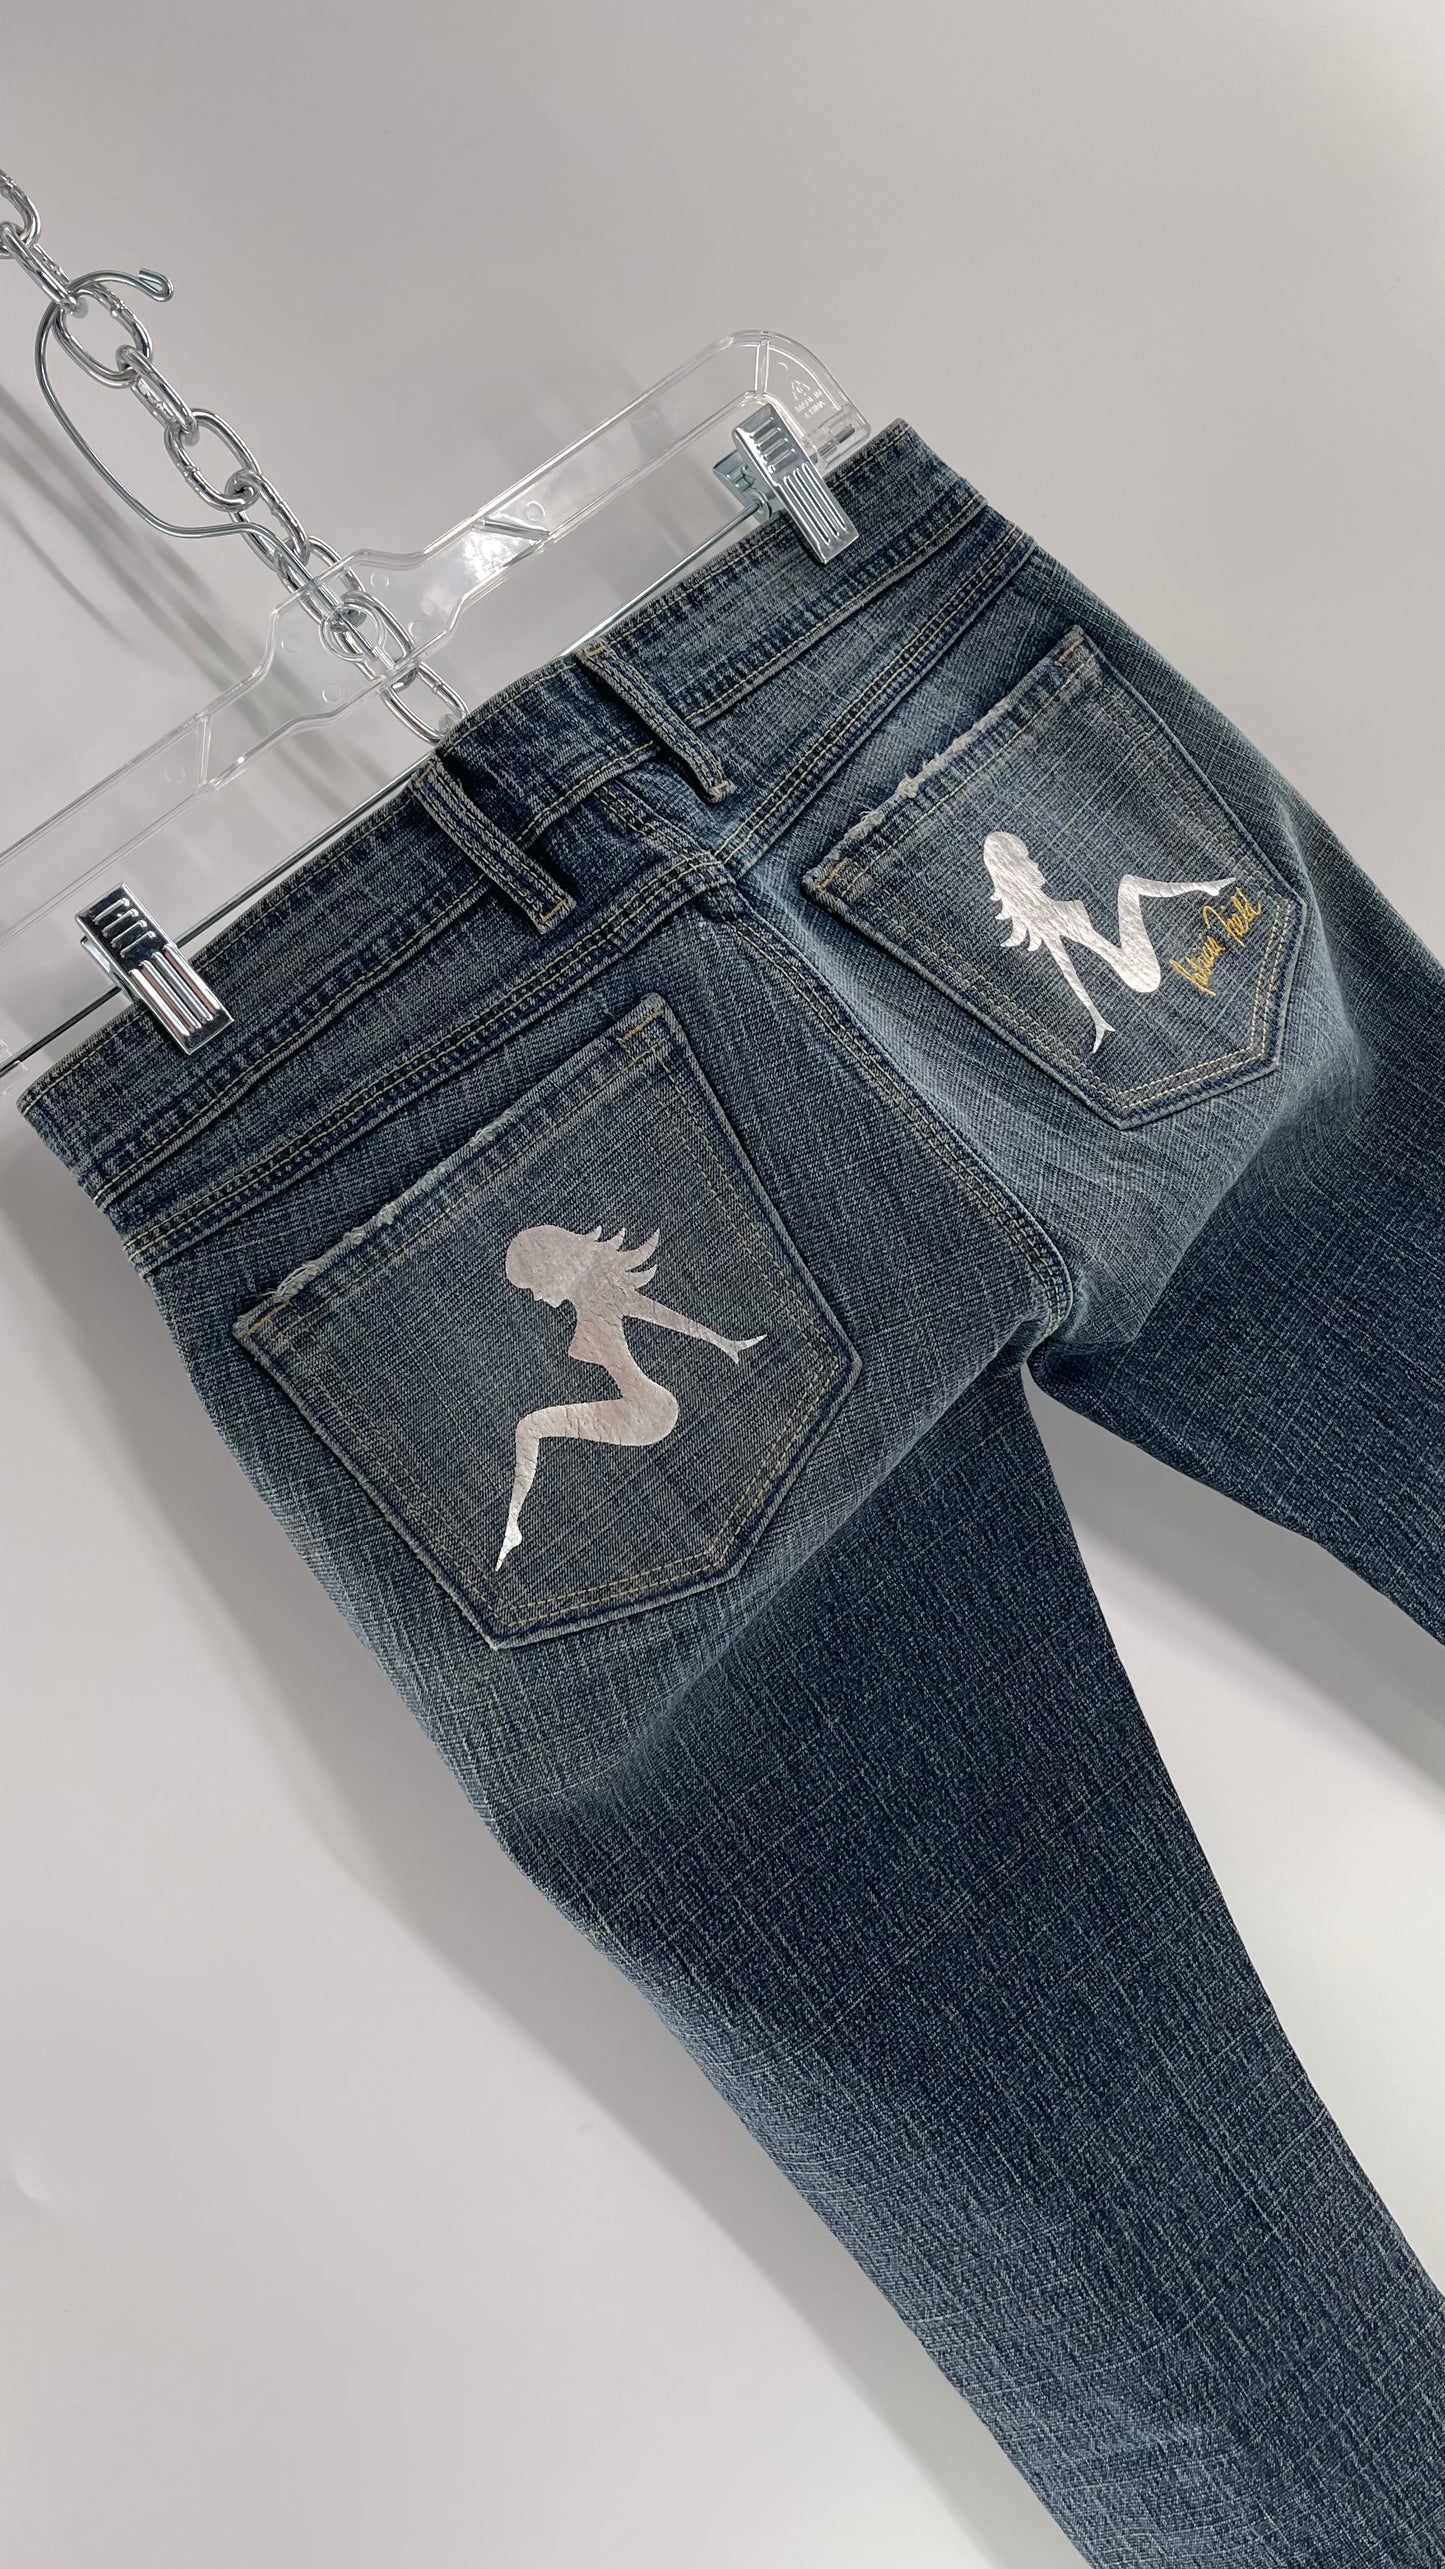 Vintage Smart AS JEANS Light Wash with Silver Metallic Female Posing Silhouette and Paulina Field Embroidery (28)